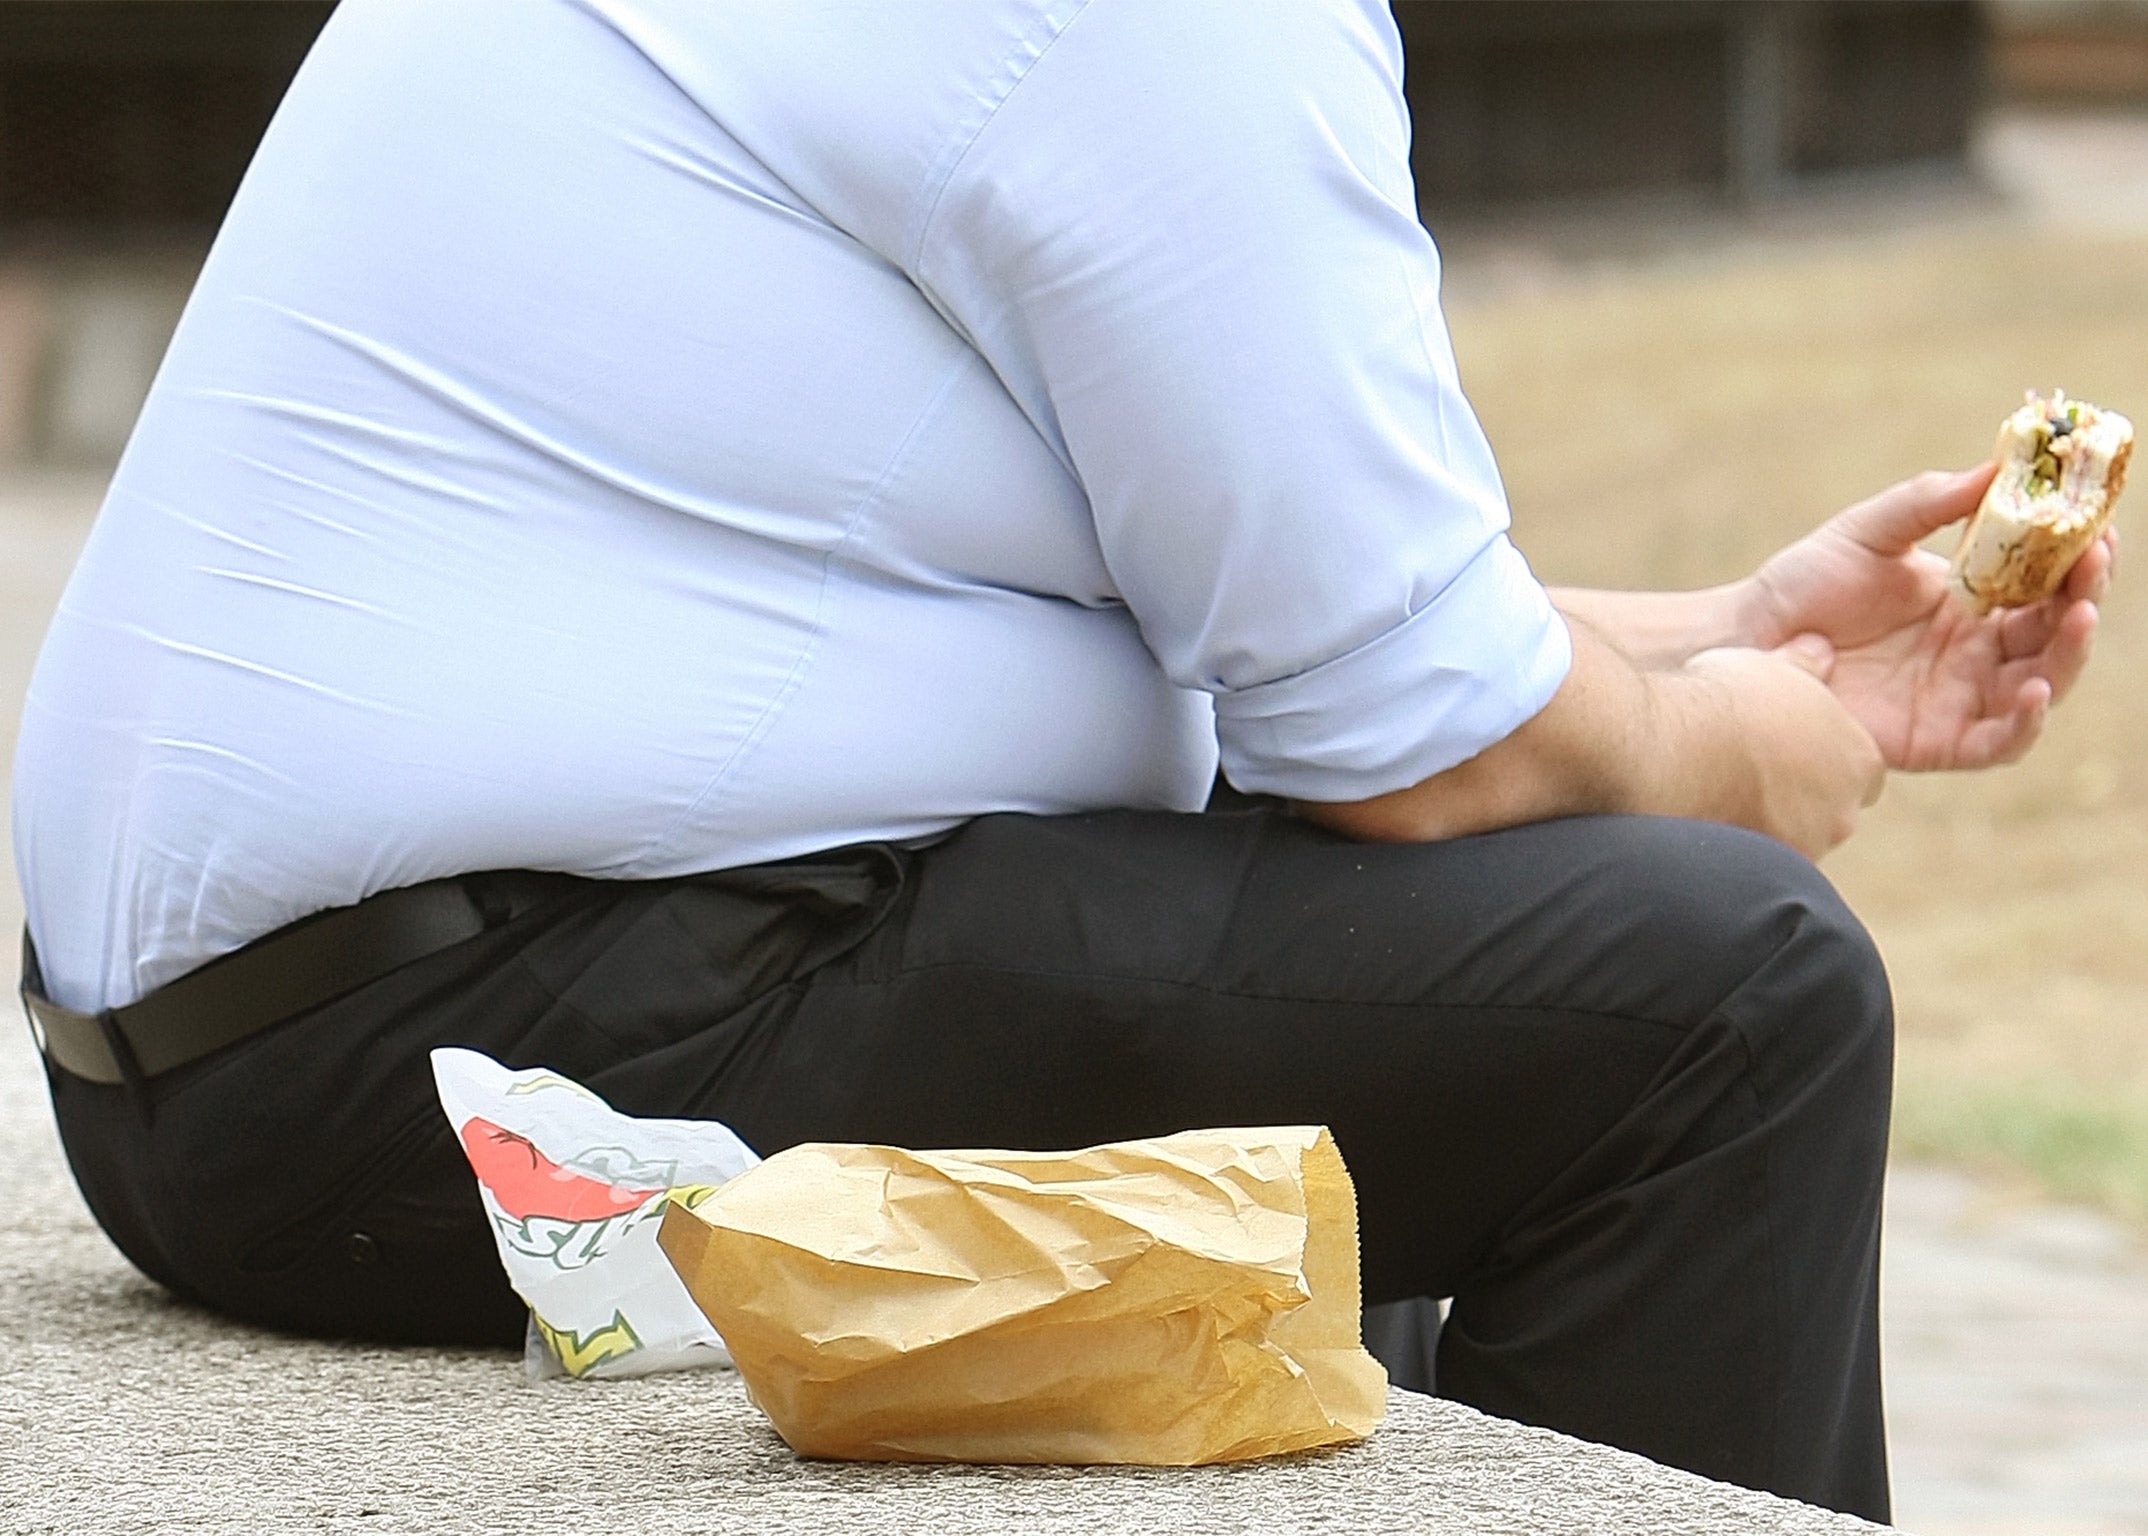 Seventy four per cent of men are predicted to be overweight by 2030